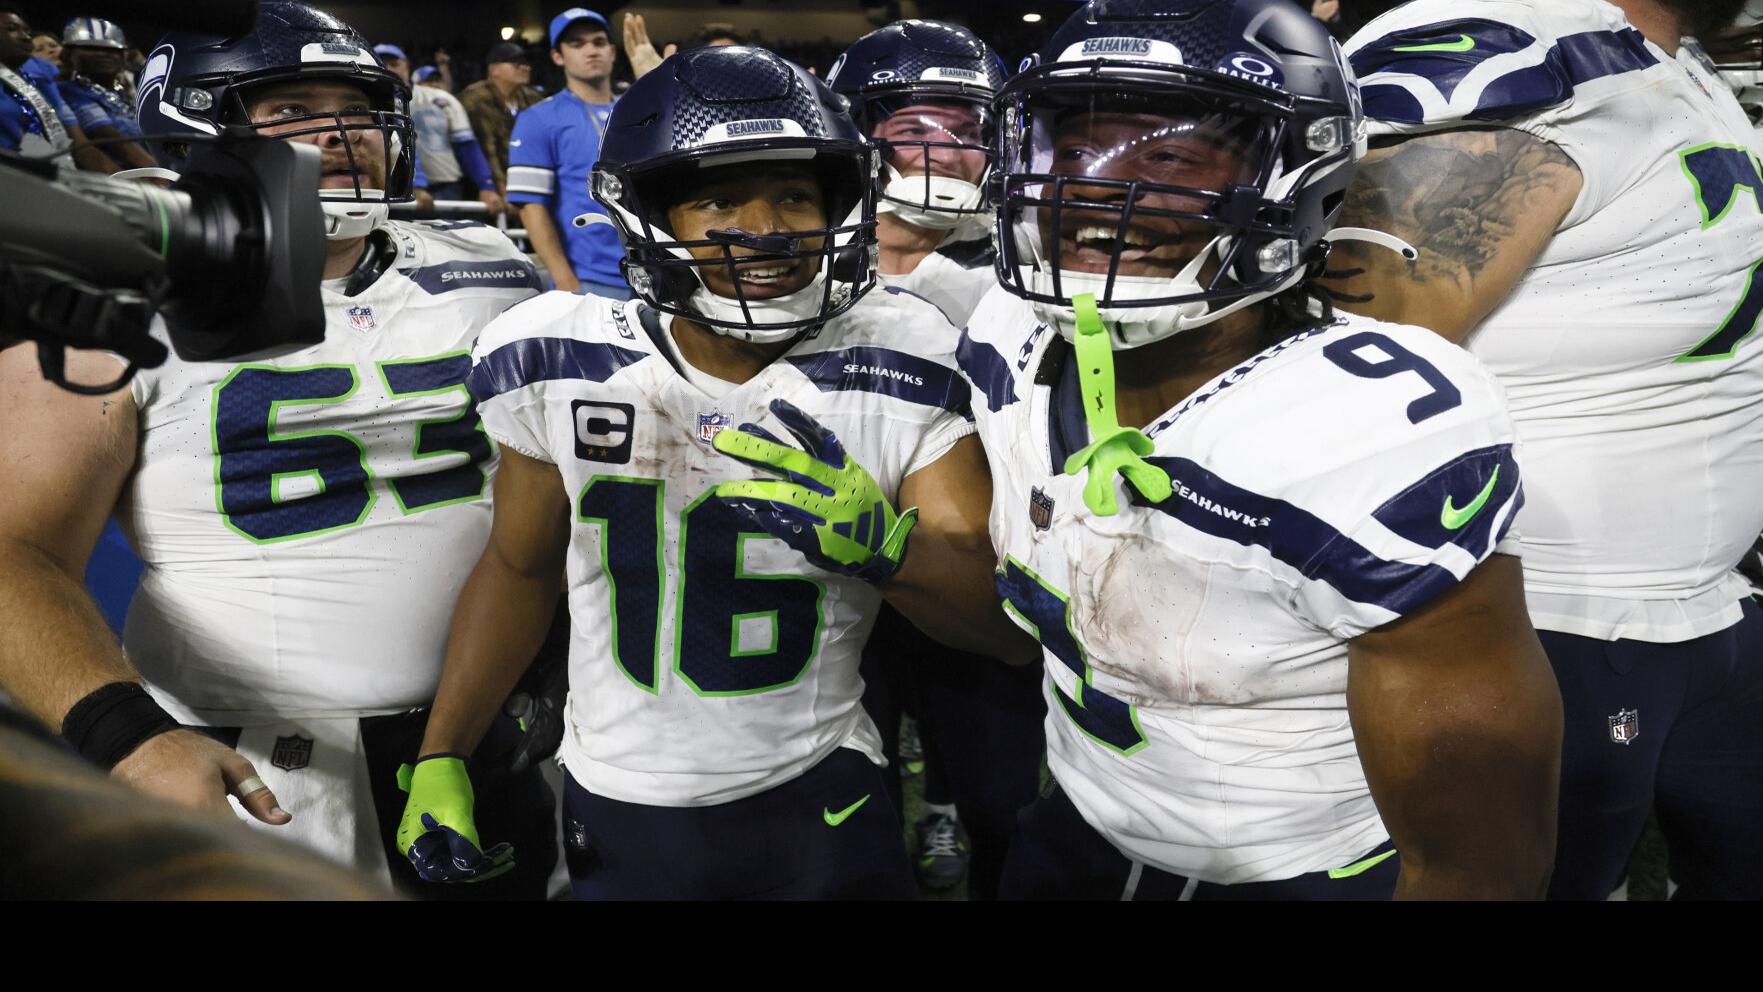 EXPIRED: Enter to win Seahawks vs Panthers Tickets! - Seattle Sports